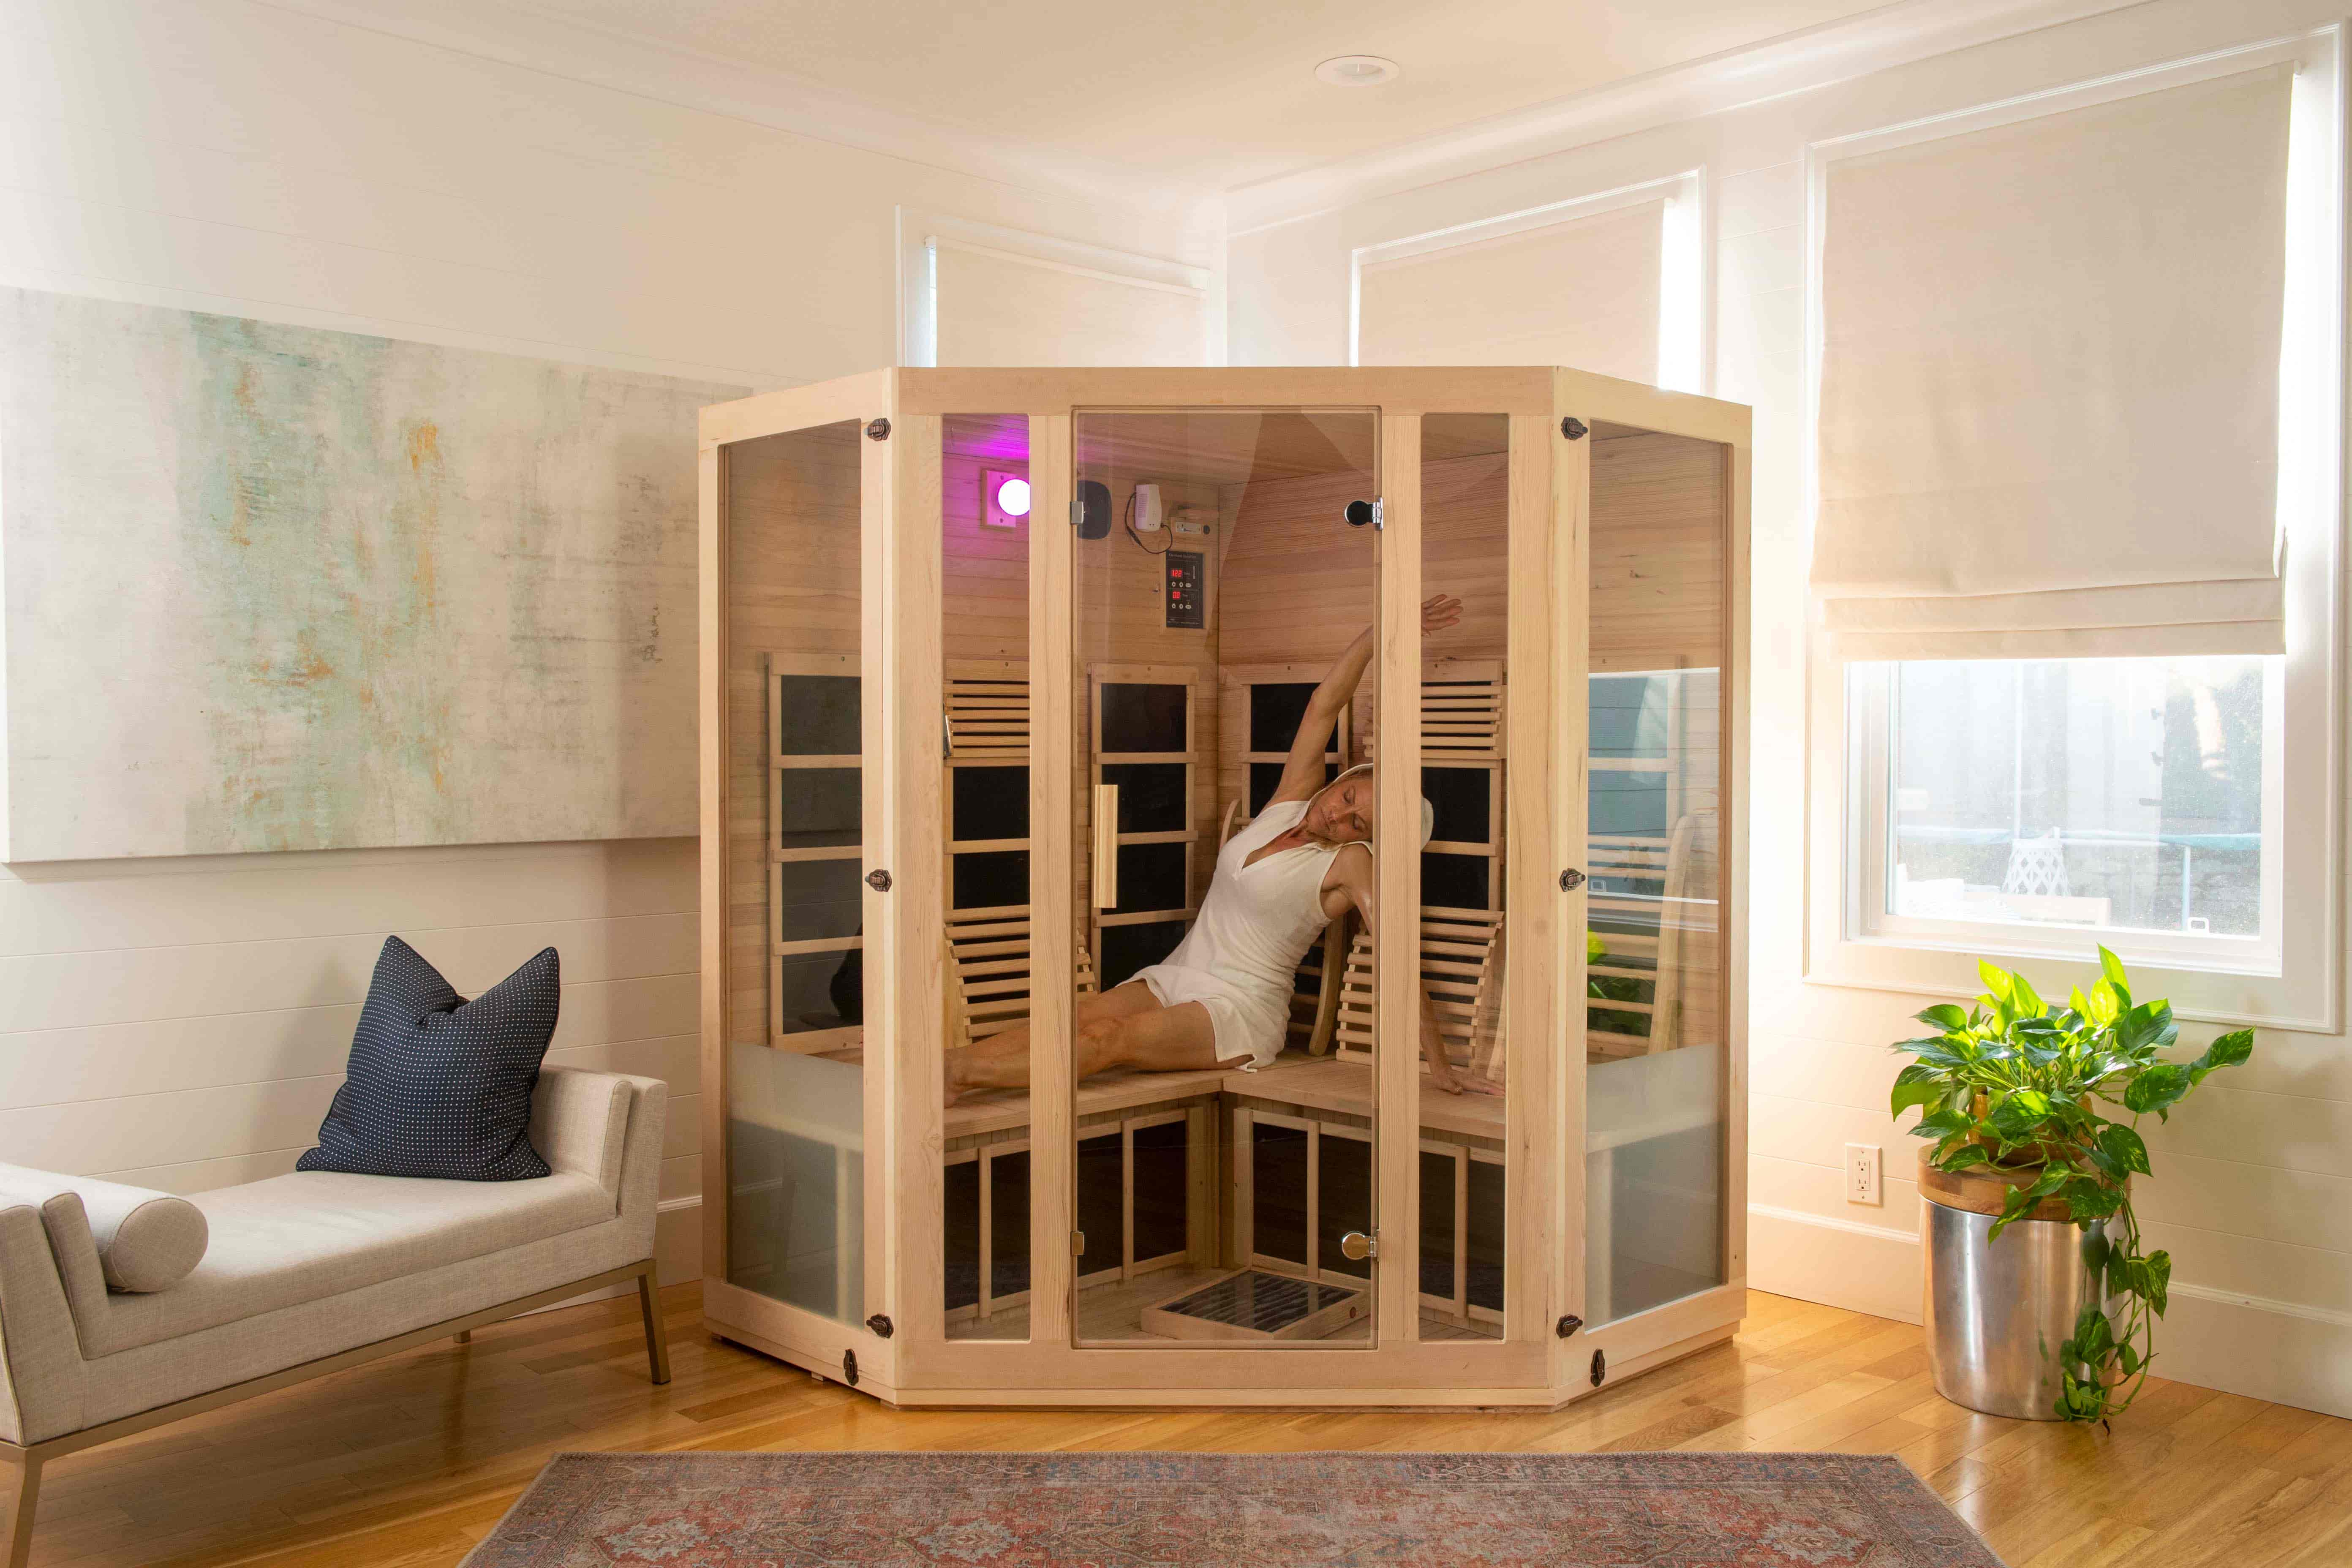 woman stretching during an infrared therapy session inside a joyous corner infrared sauna by JNH Lifestyles